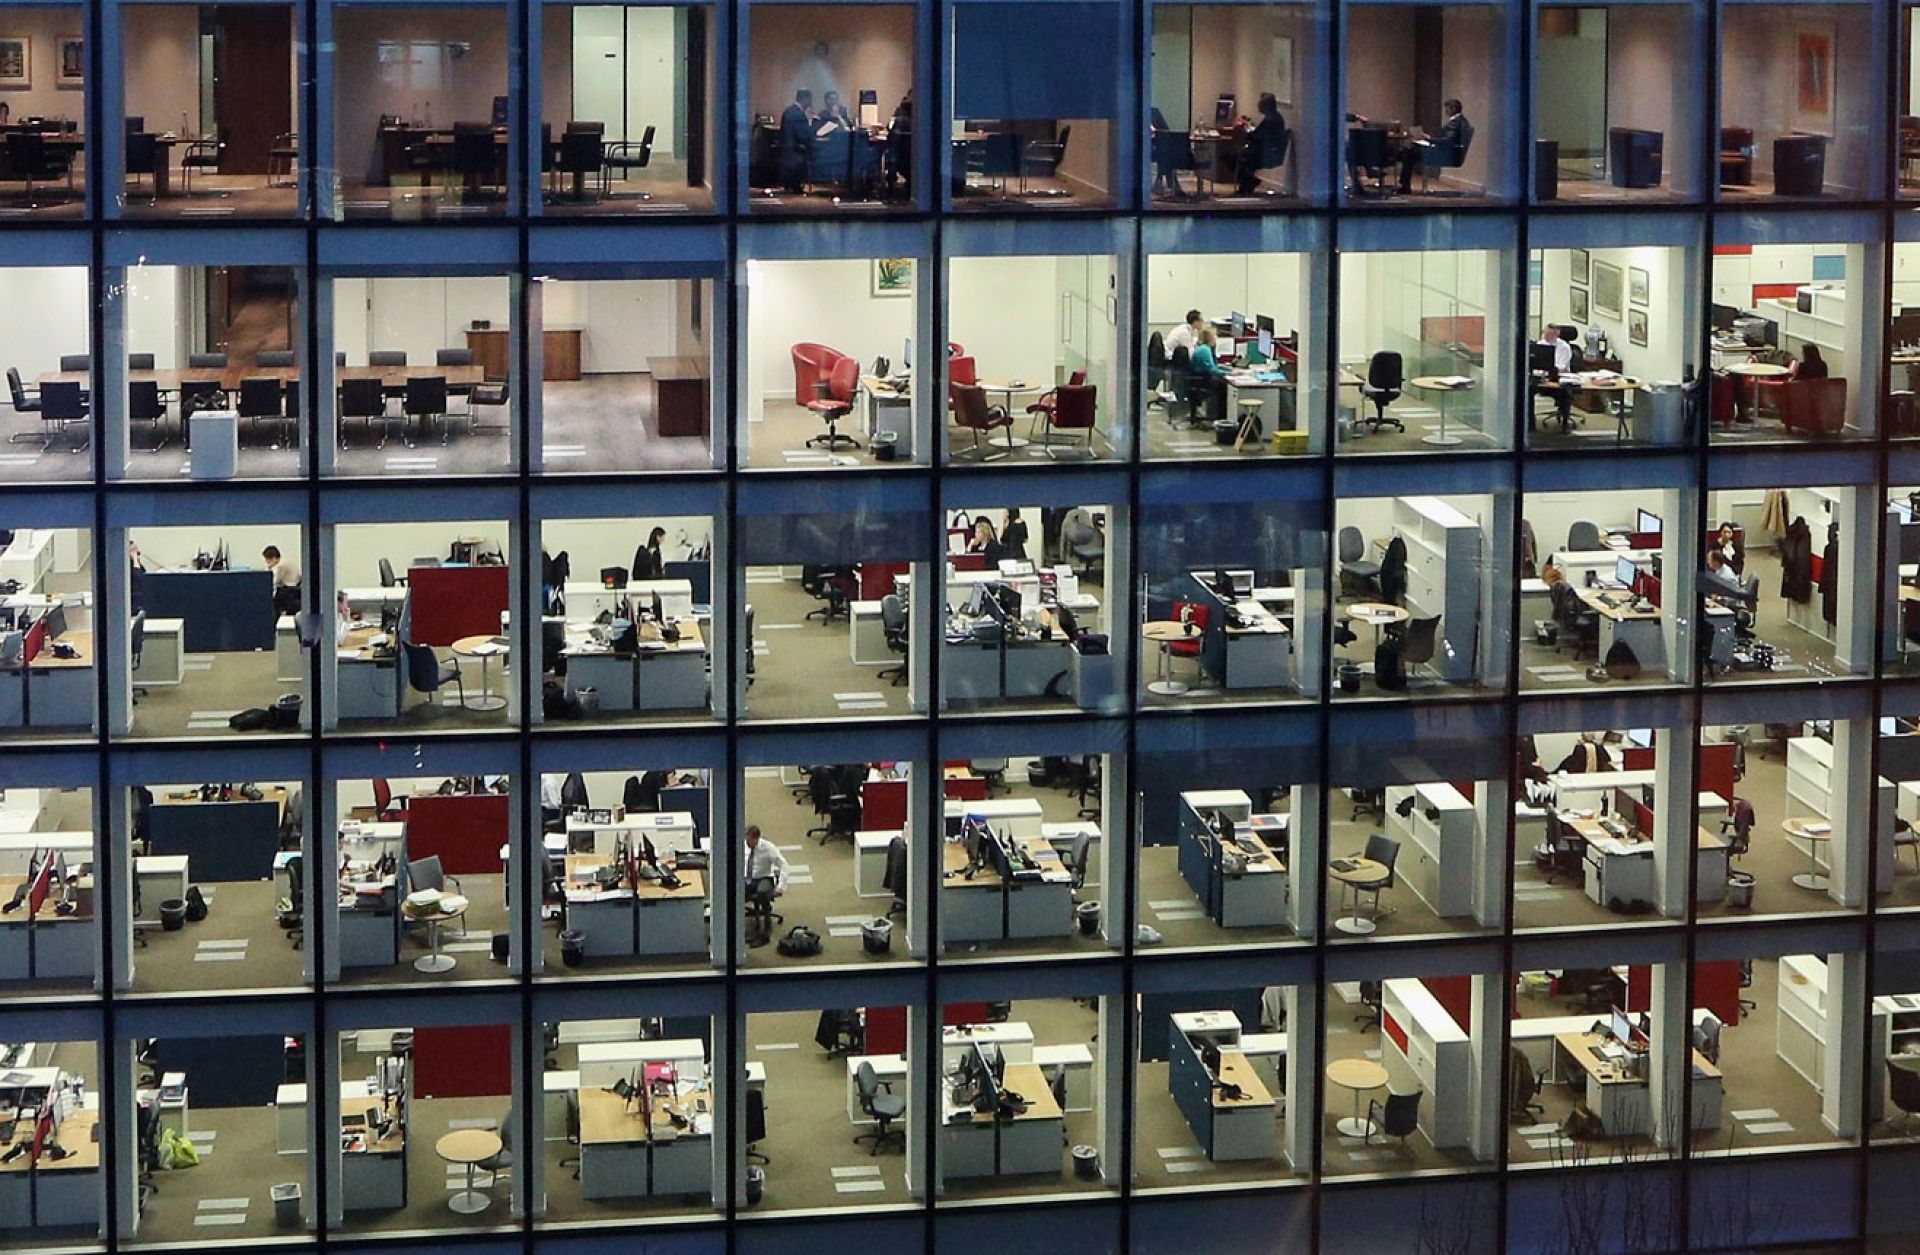 A picture of a workers in an office building.